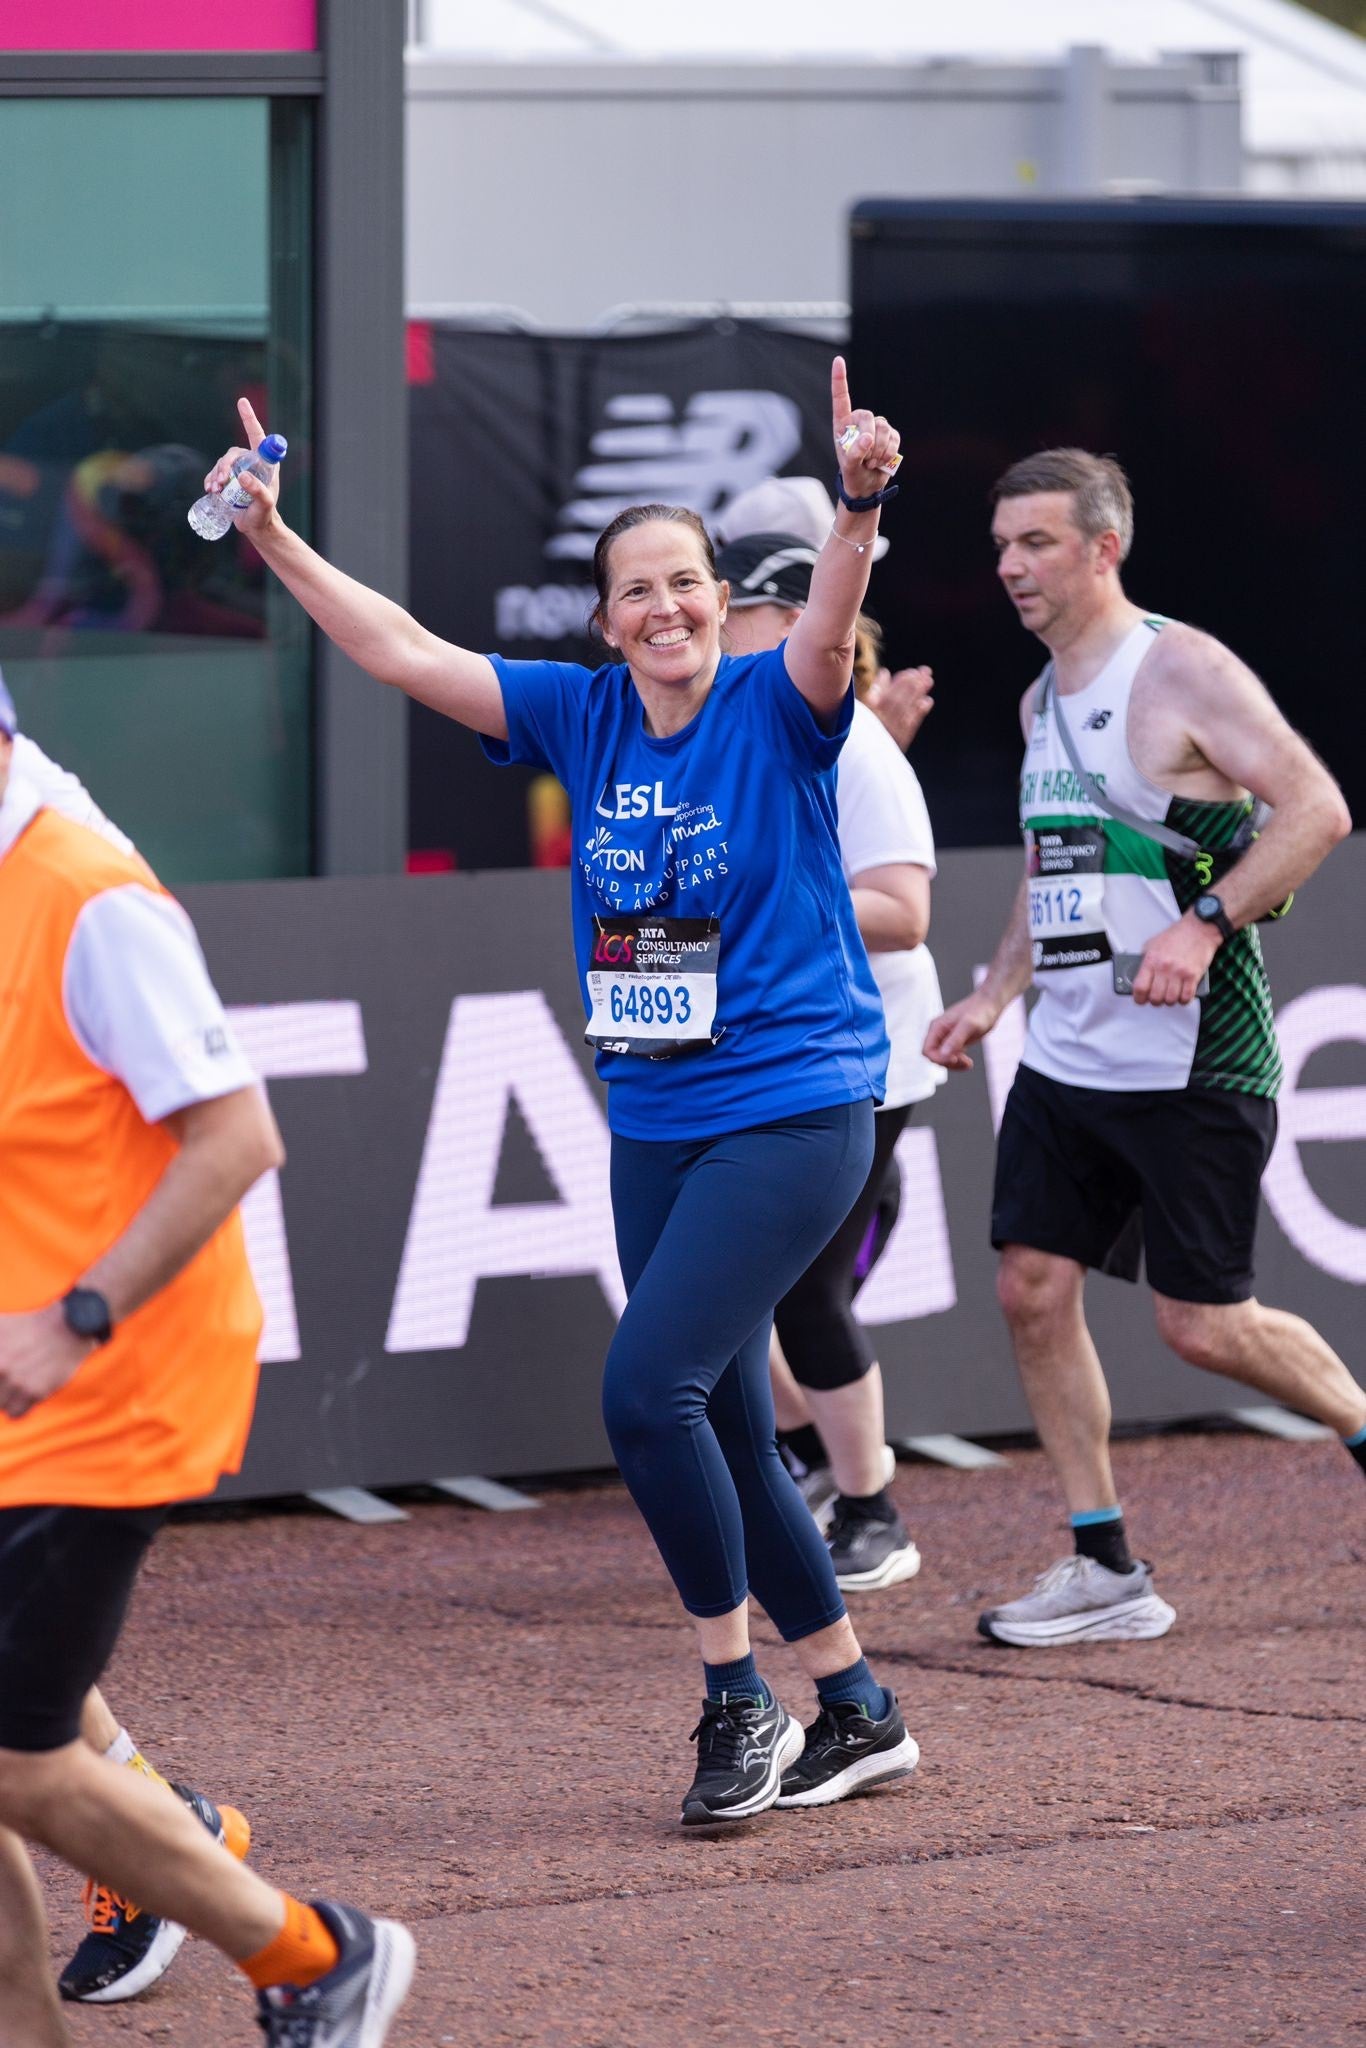 The energy and belief of the crowd helped spur Lesley on during the marathon